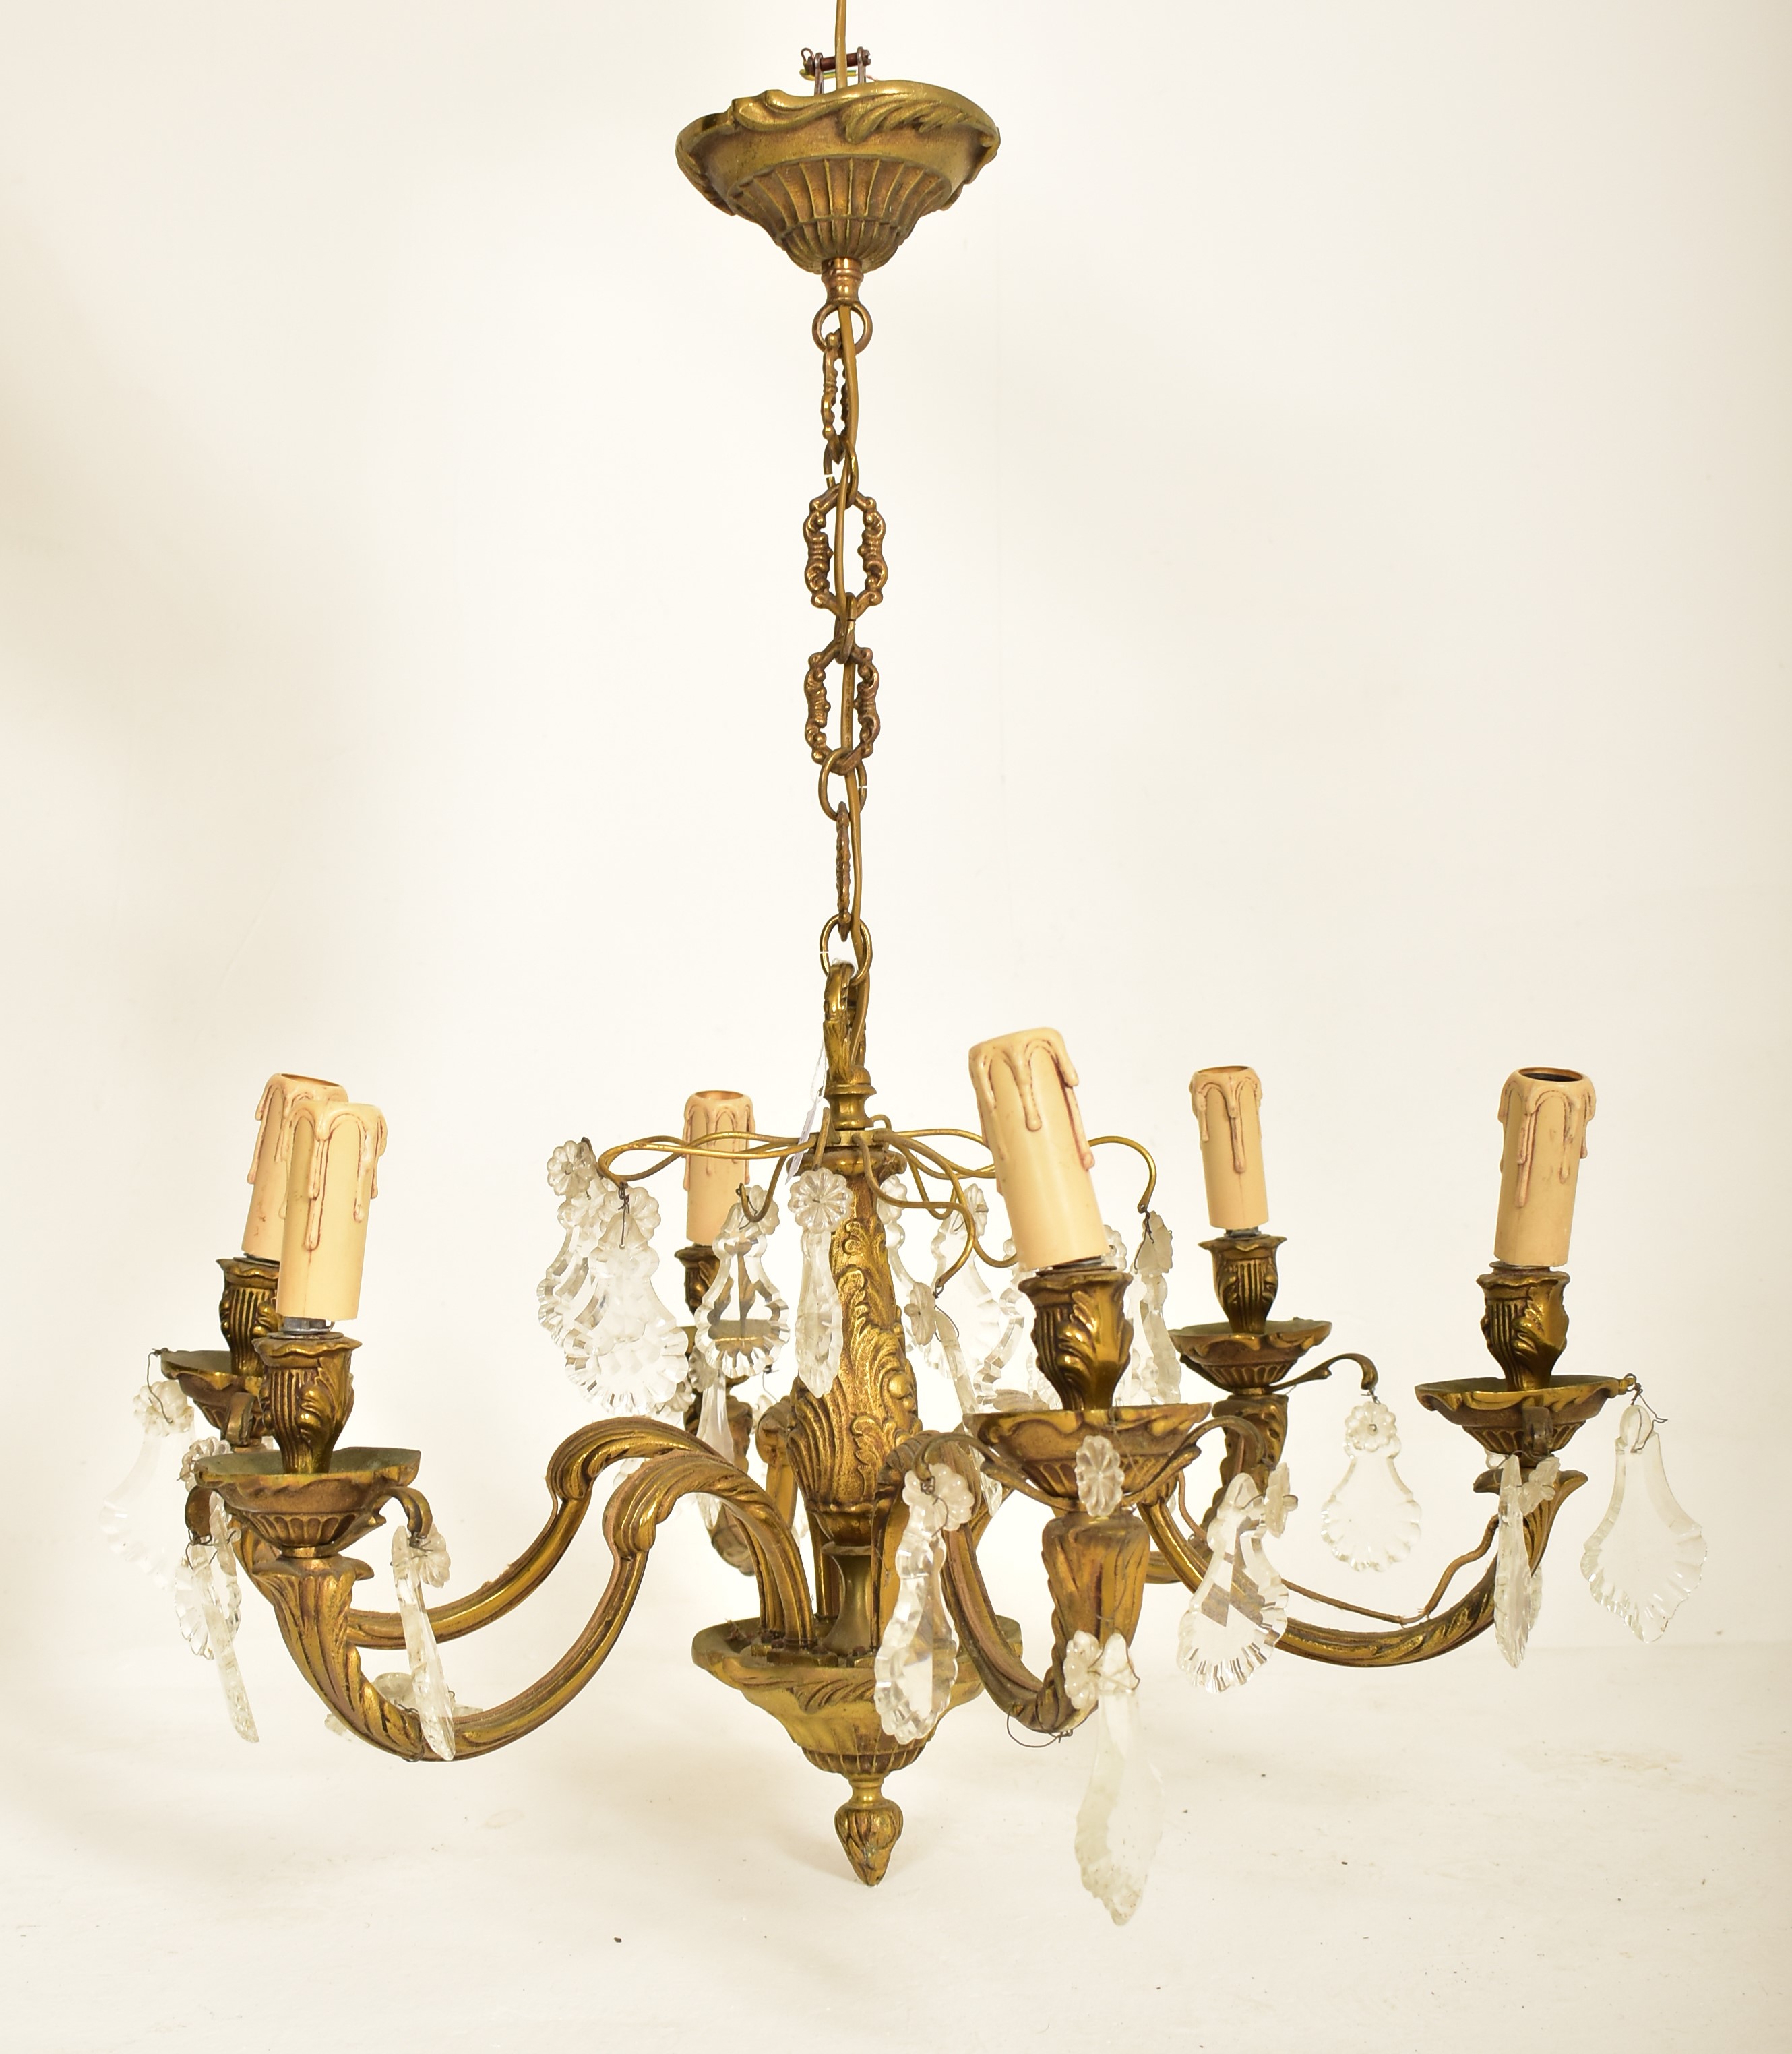 CONTINENTAL INSPIRED 1920S STYLE GILT BRASS SIX ARM CHANDELIER - Image 2 of 7